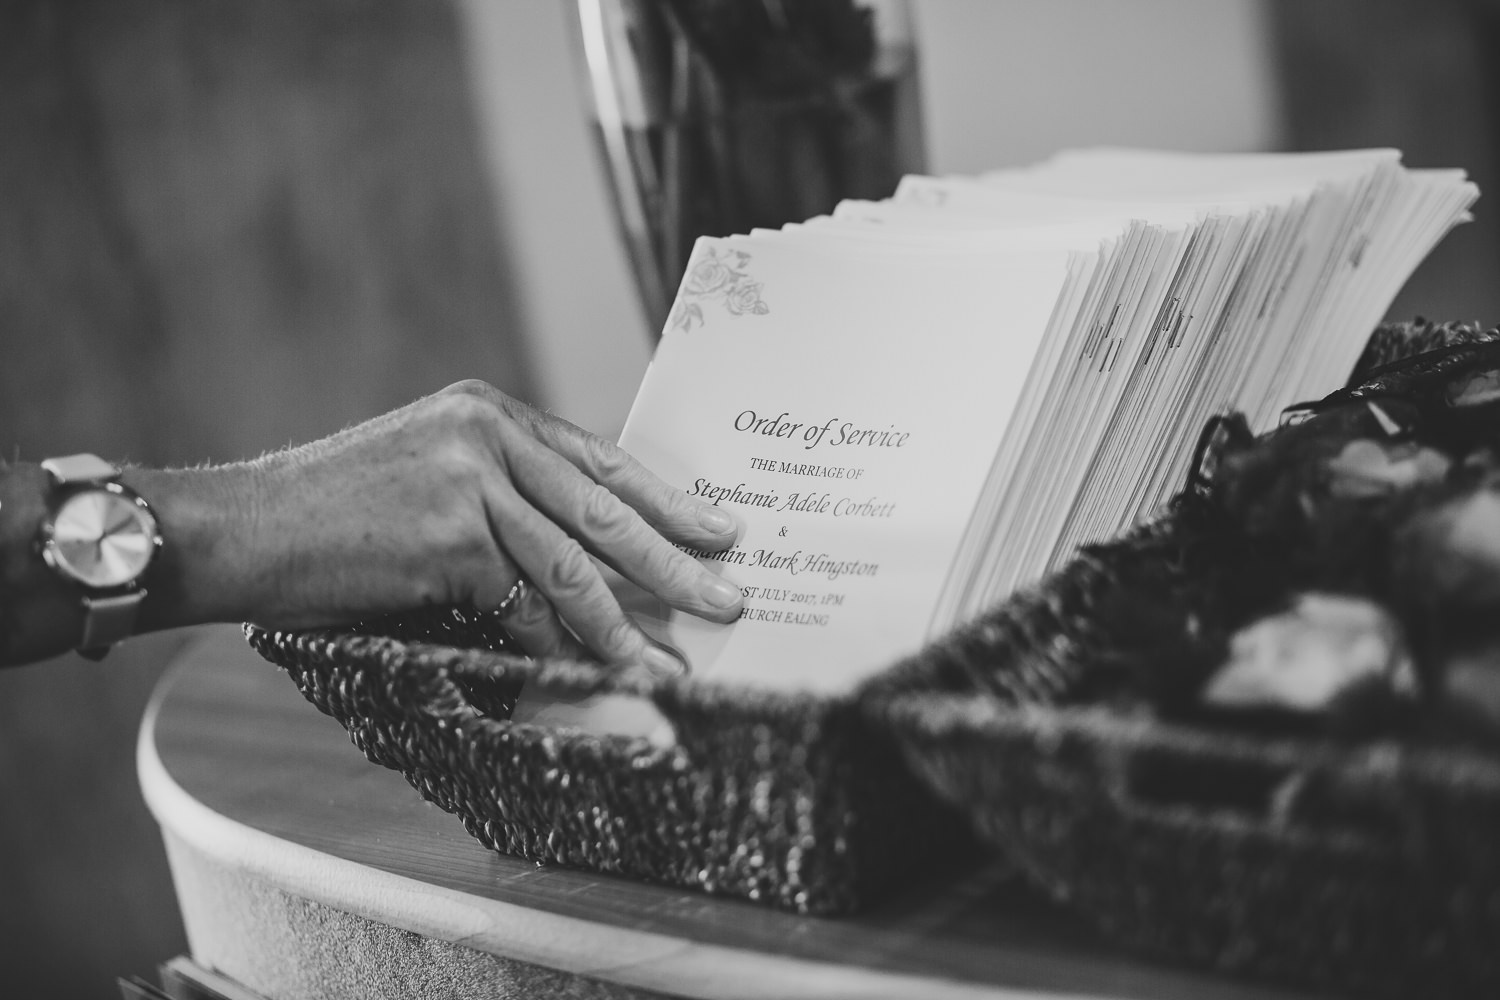 Black and white wedding photo of a hand grabbing a wedding order of service leaflet